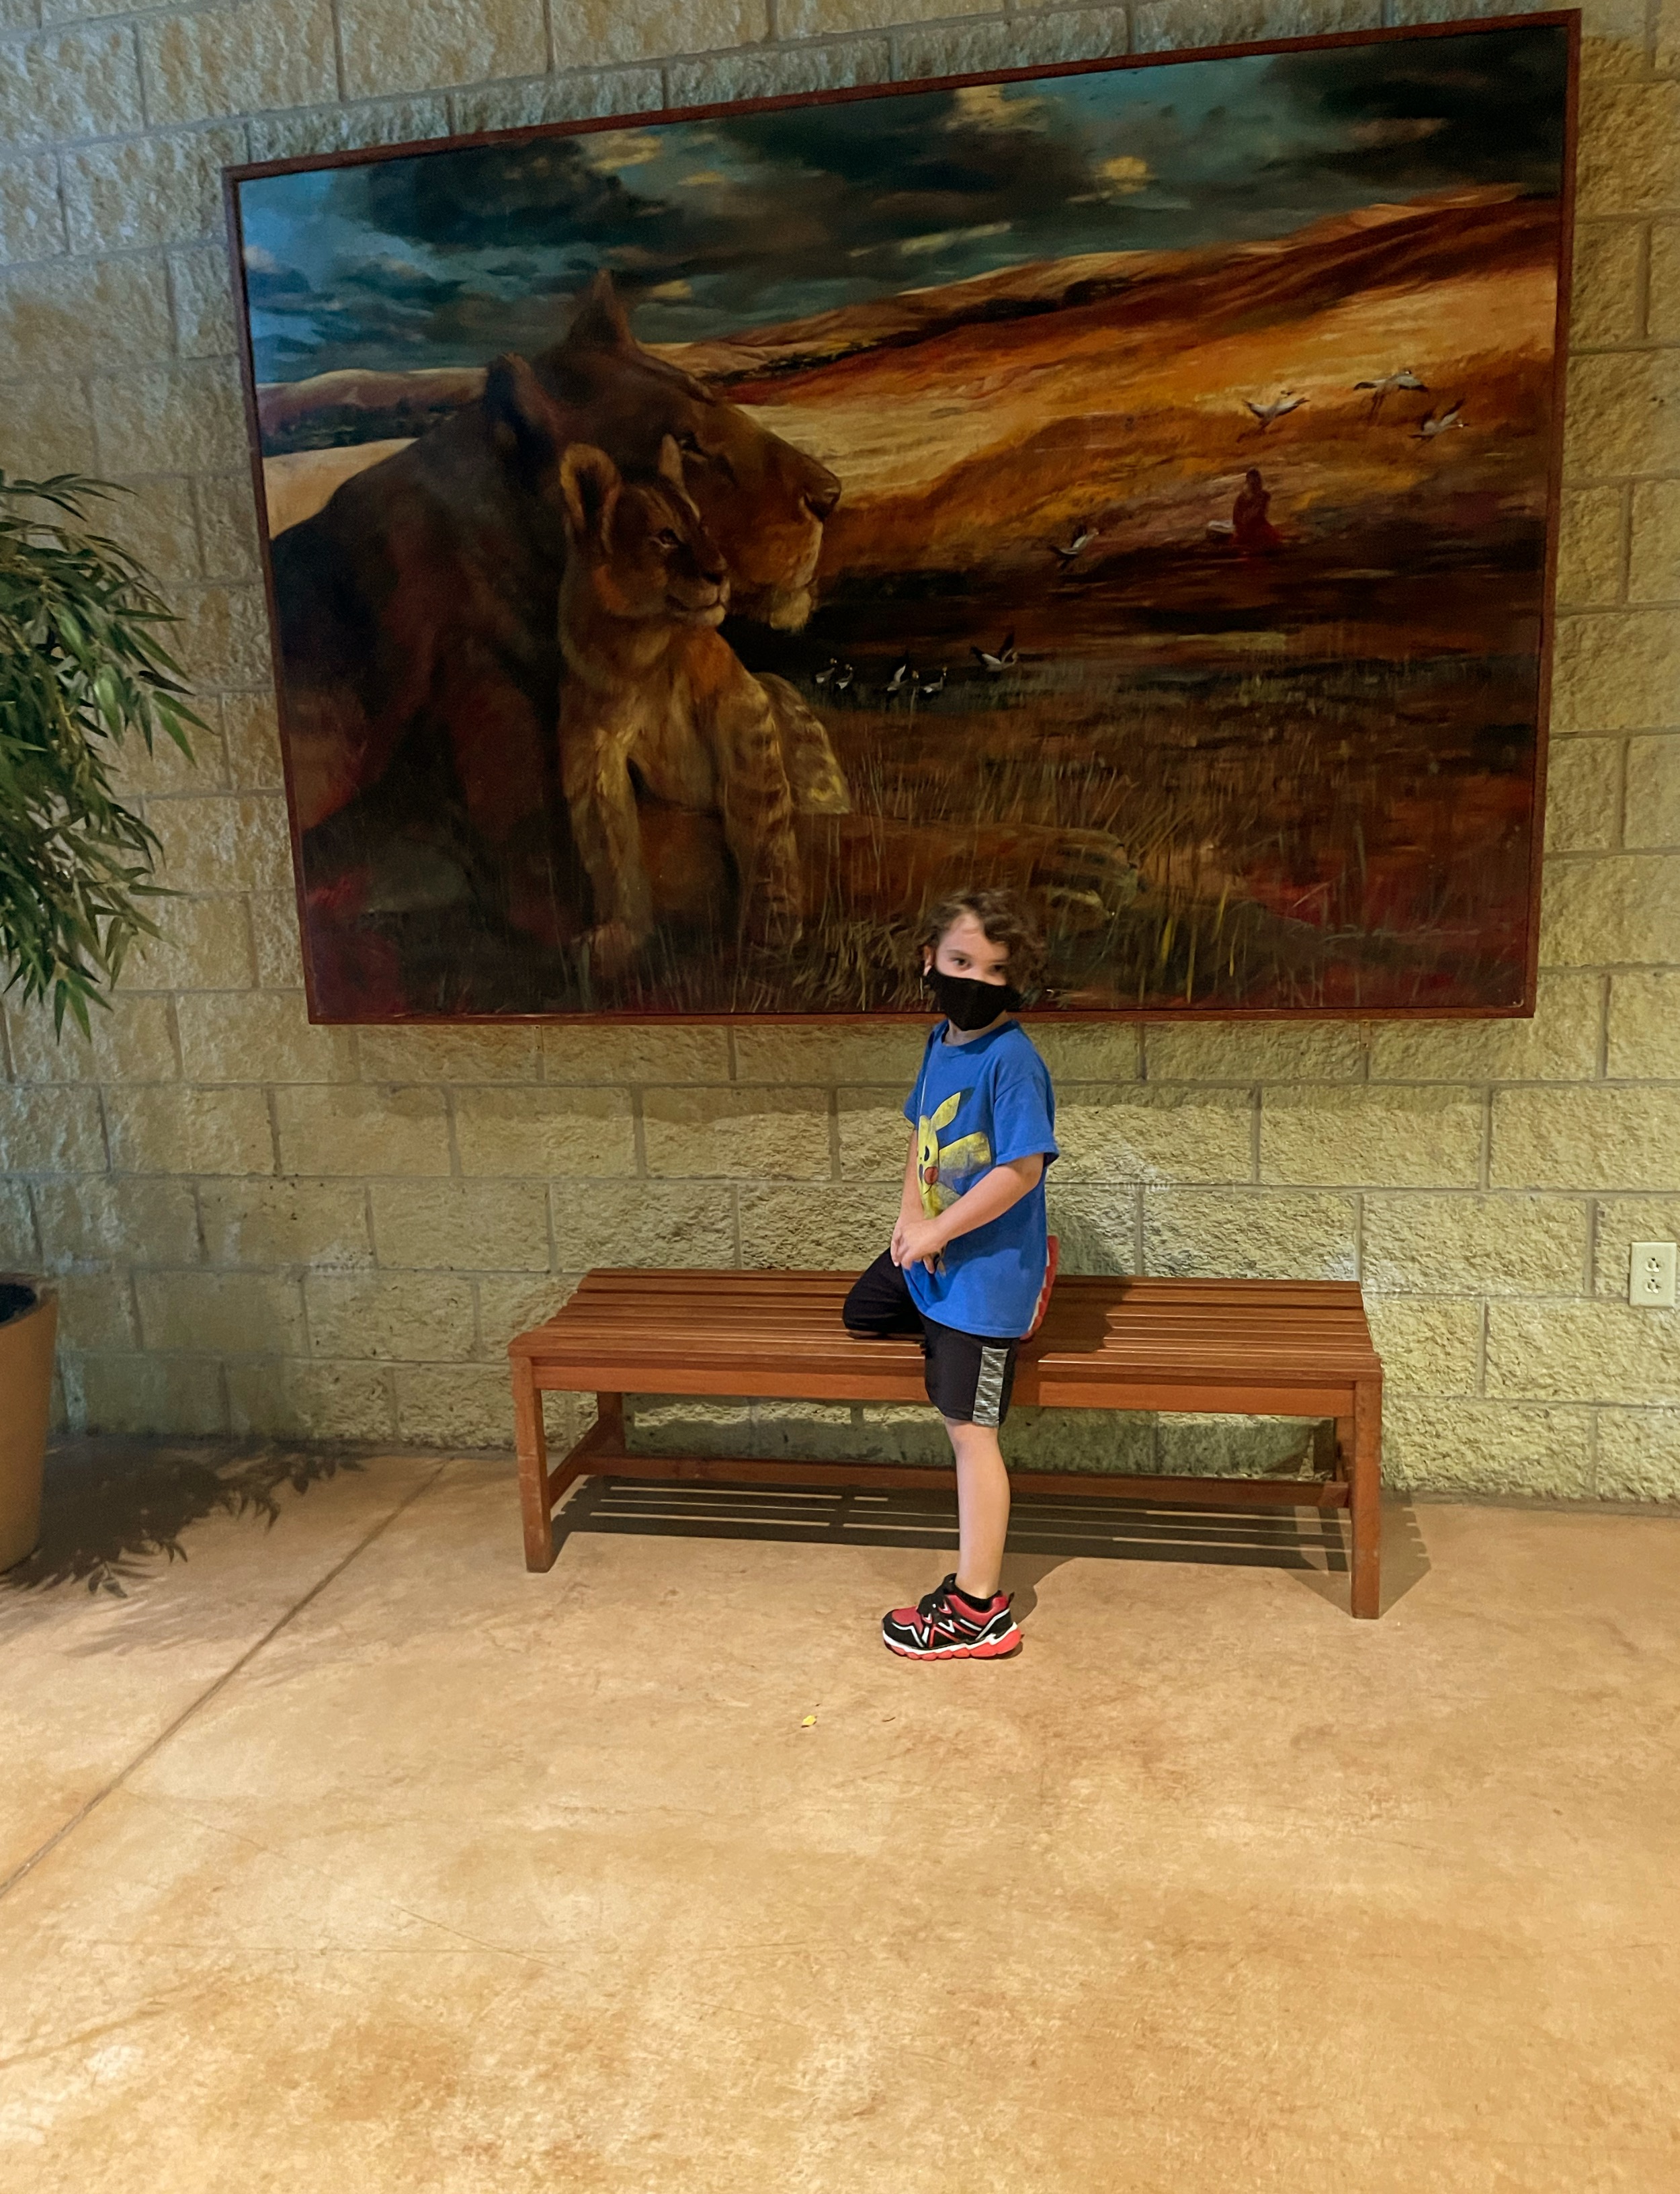 Kellen with a beautiful portrait from  The Lion King Pa took us all to the zoo, a wonderful day
August 2021